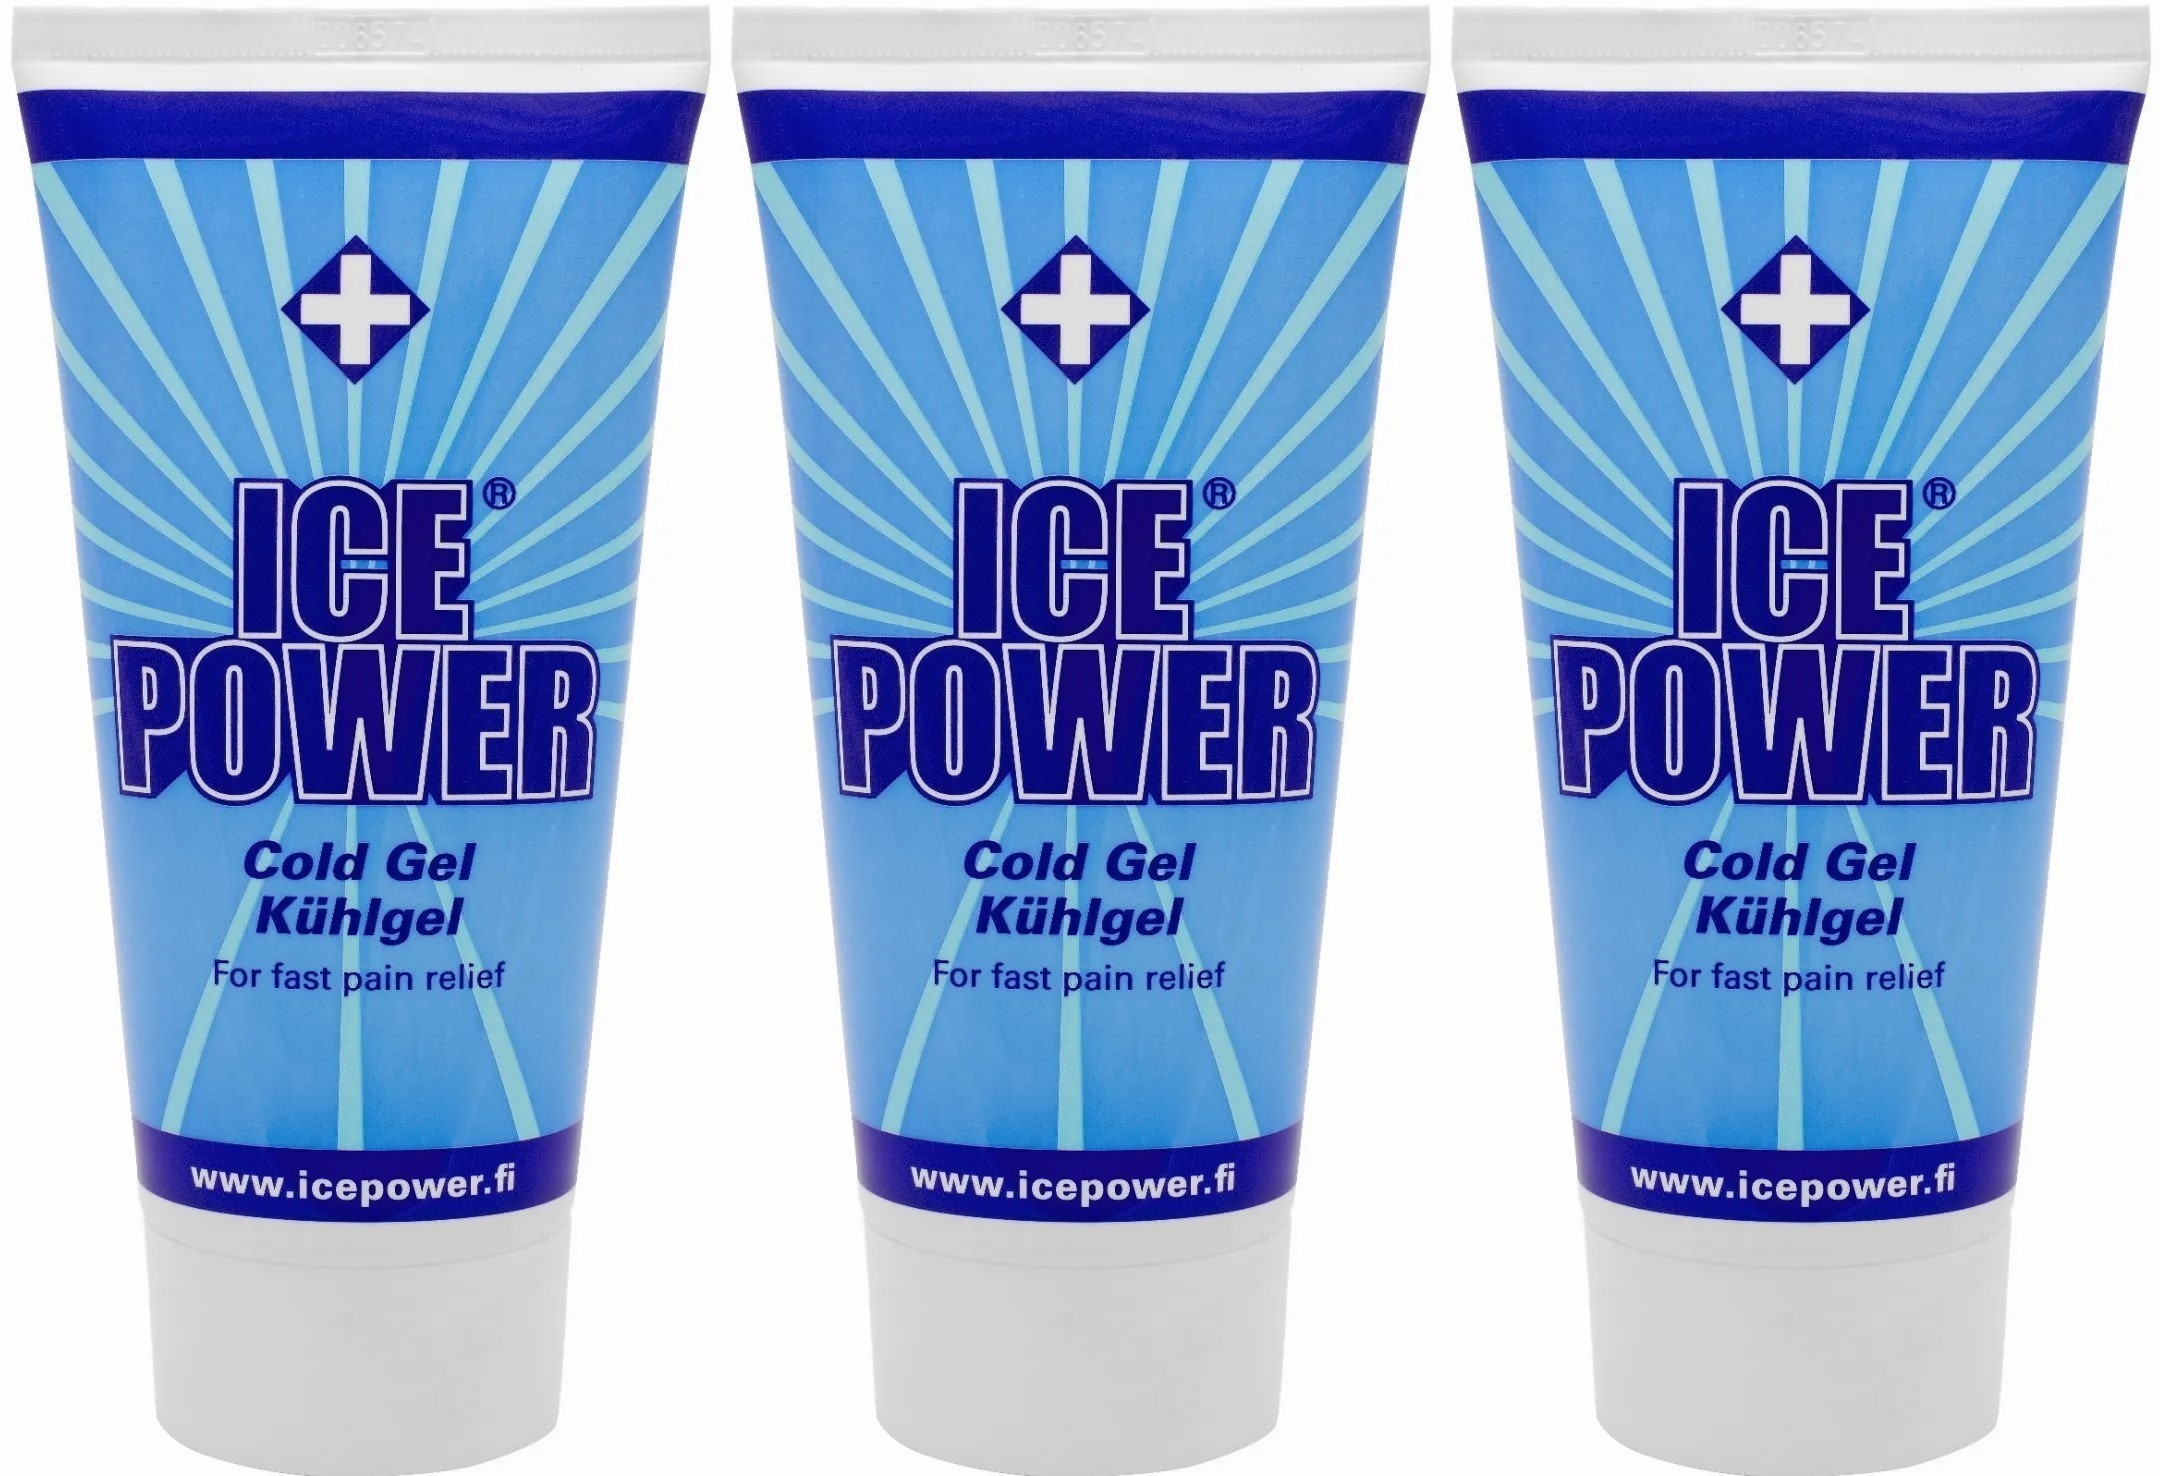 icepower cold gel 3 tubes